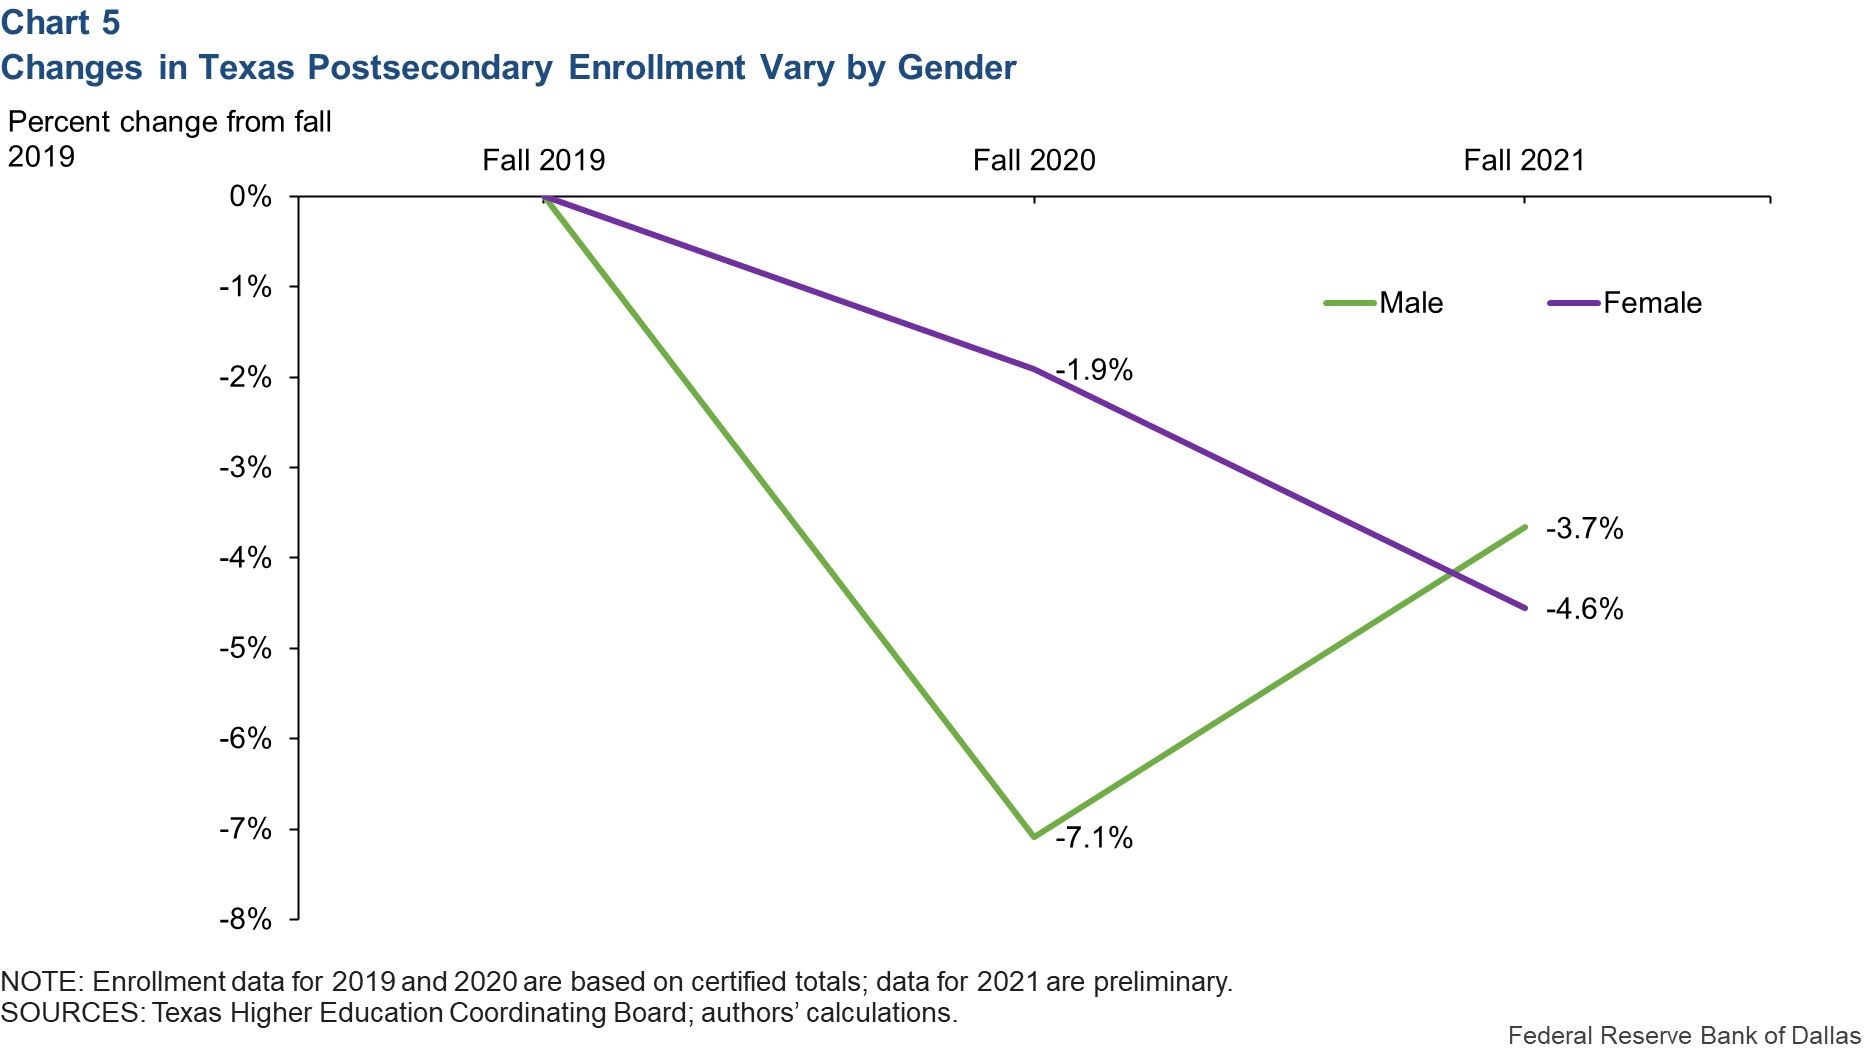 Changes in Texas Postsecondary Enrollment Vary by Gender